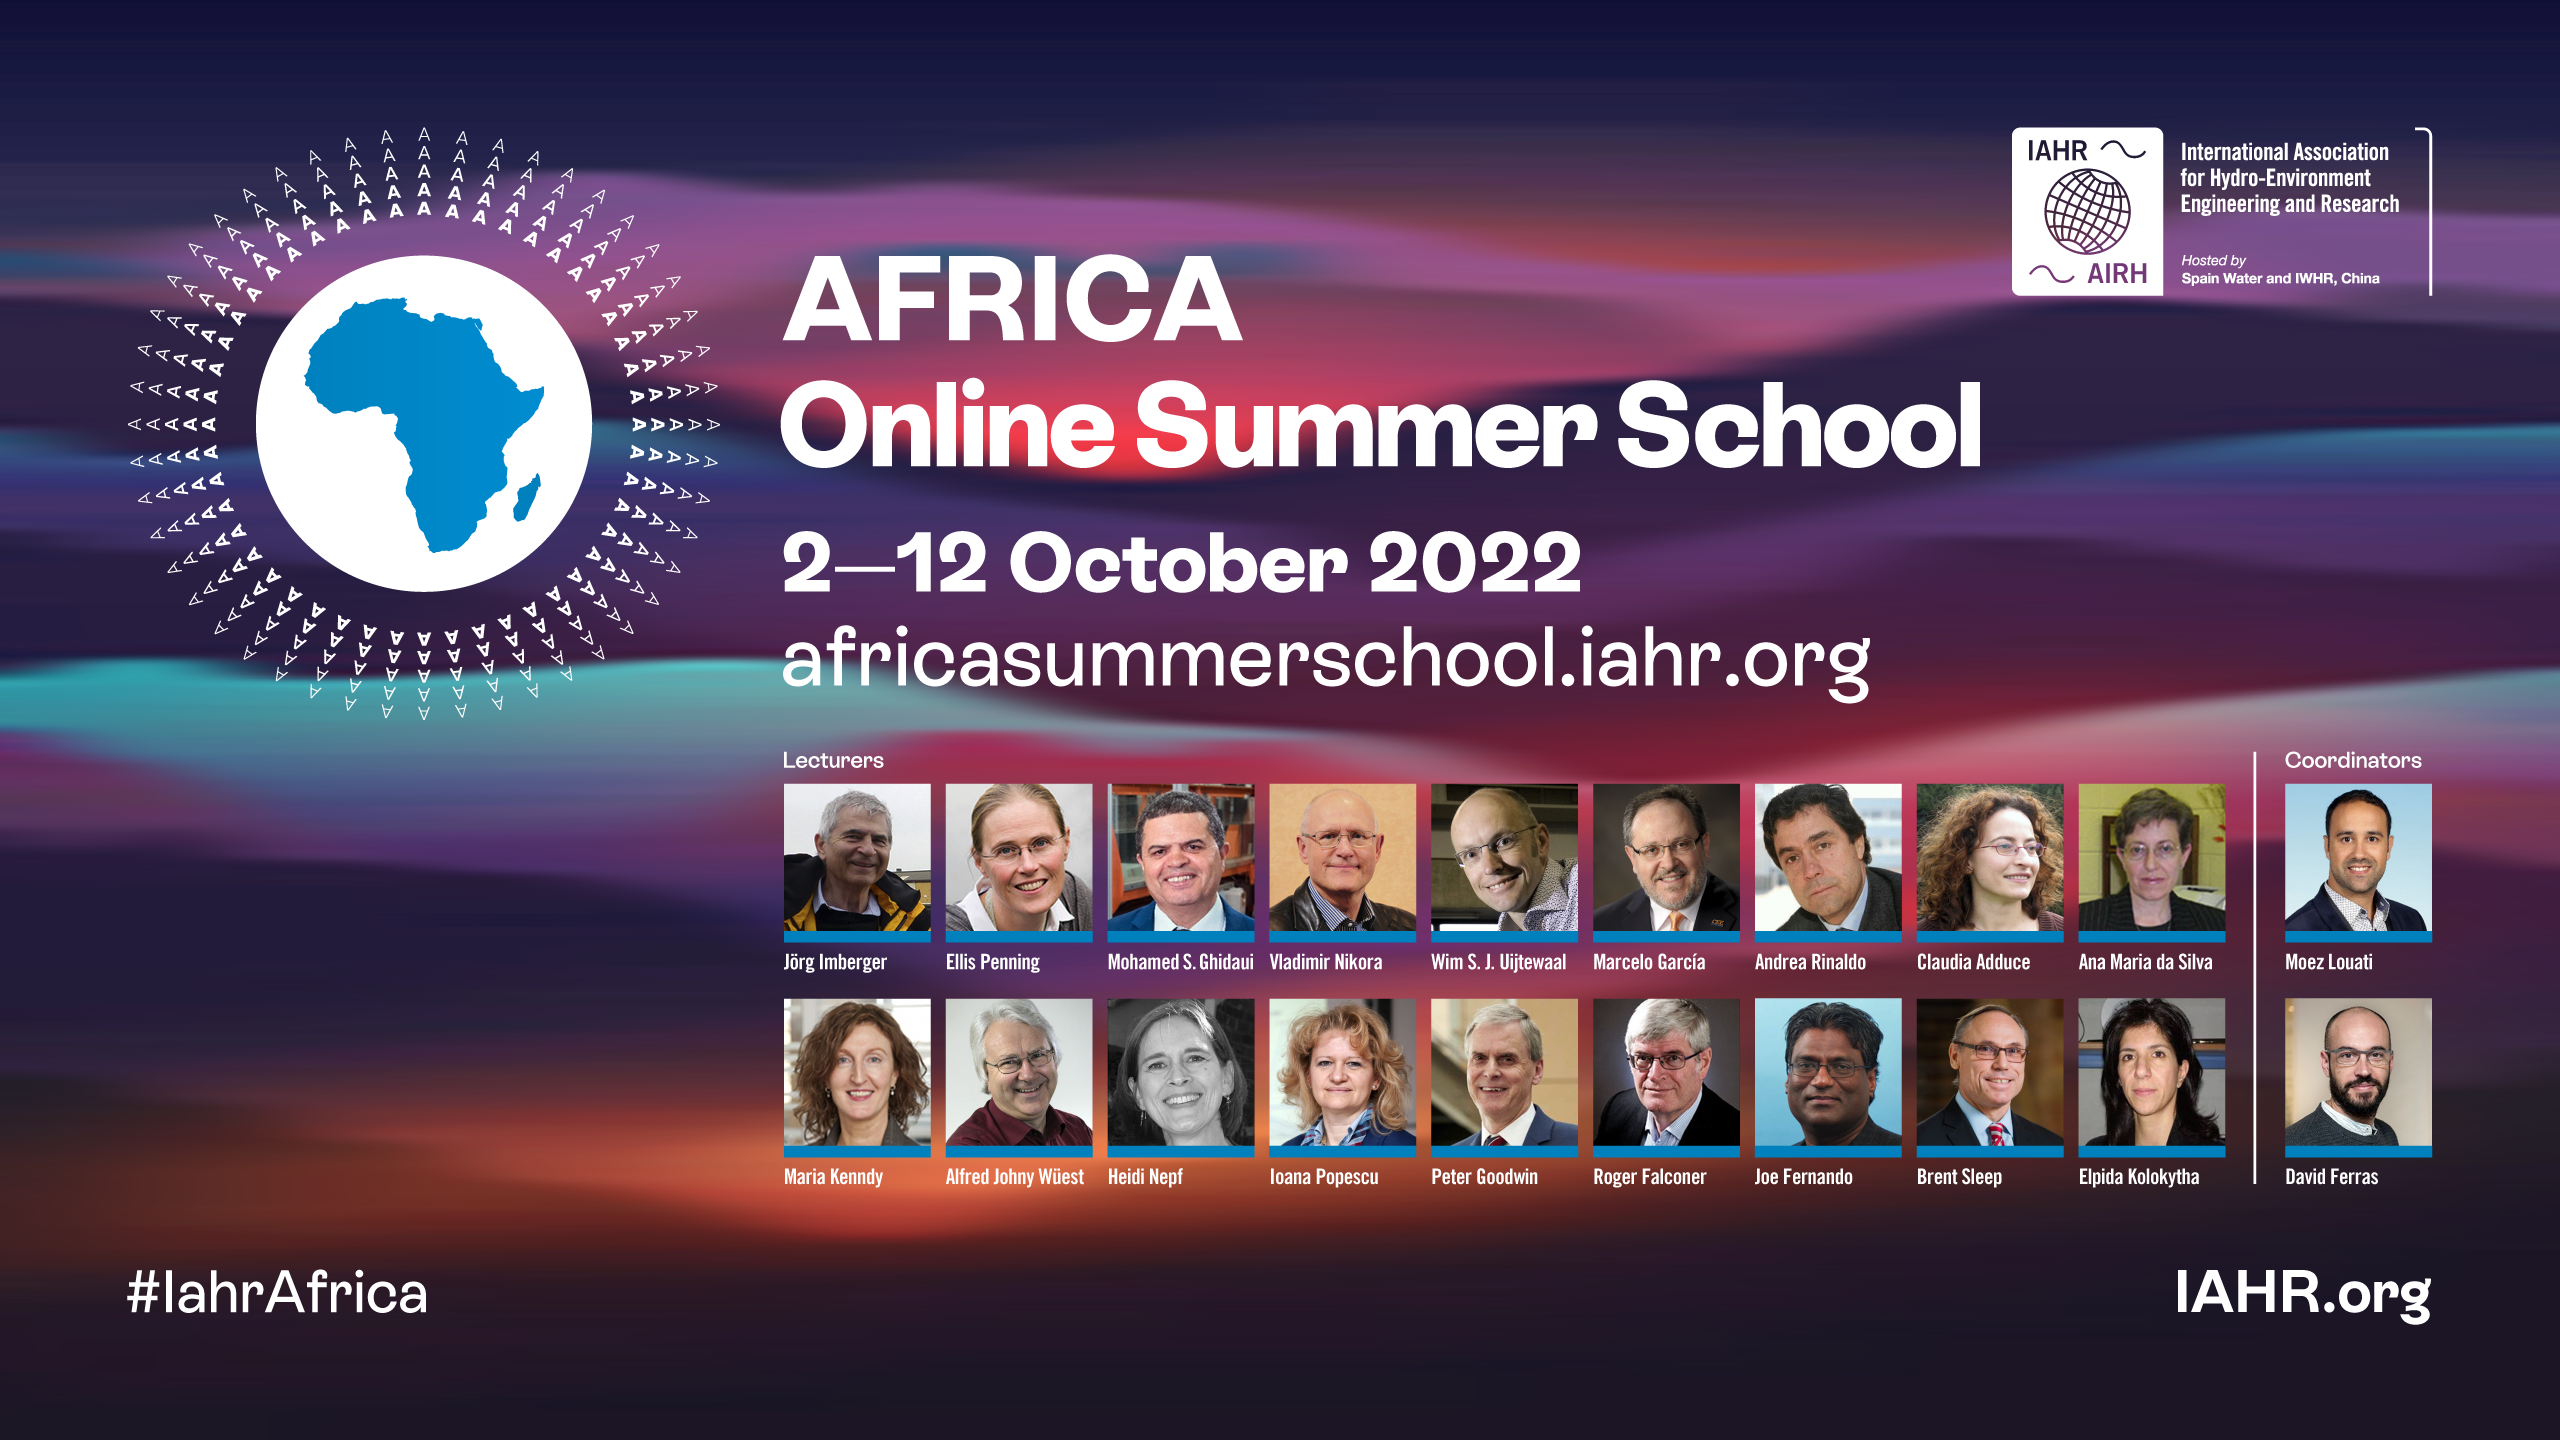 Three days left for the IAHR Africa Online Summer School 